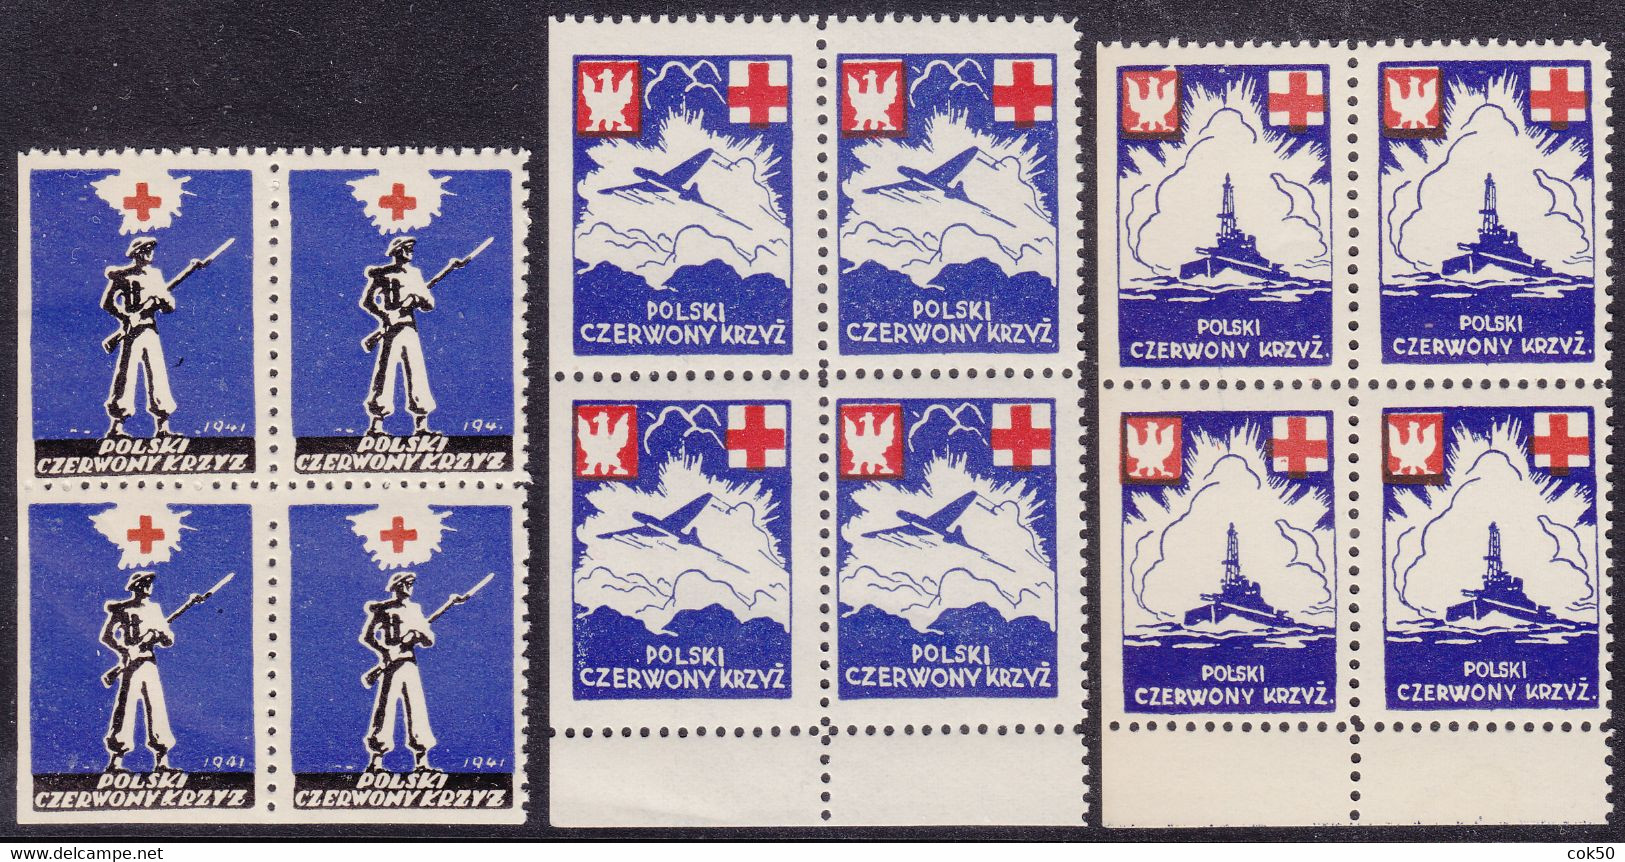 POLAND 1941 - Exile Governm. In London/Red Cross, MNH Lower LEFT Corner Bl.of 4, Two Stamps Perf. 3 Sides - Study Scan ! - Regering In Londen(Ballingschap)